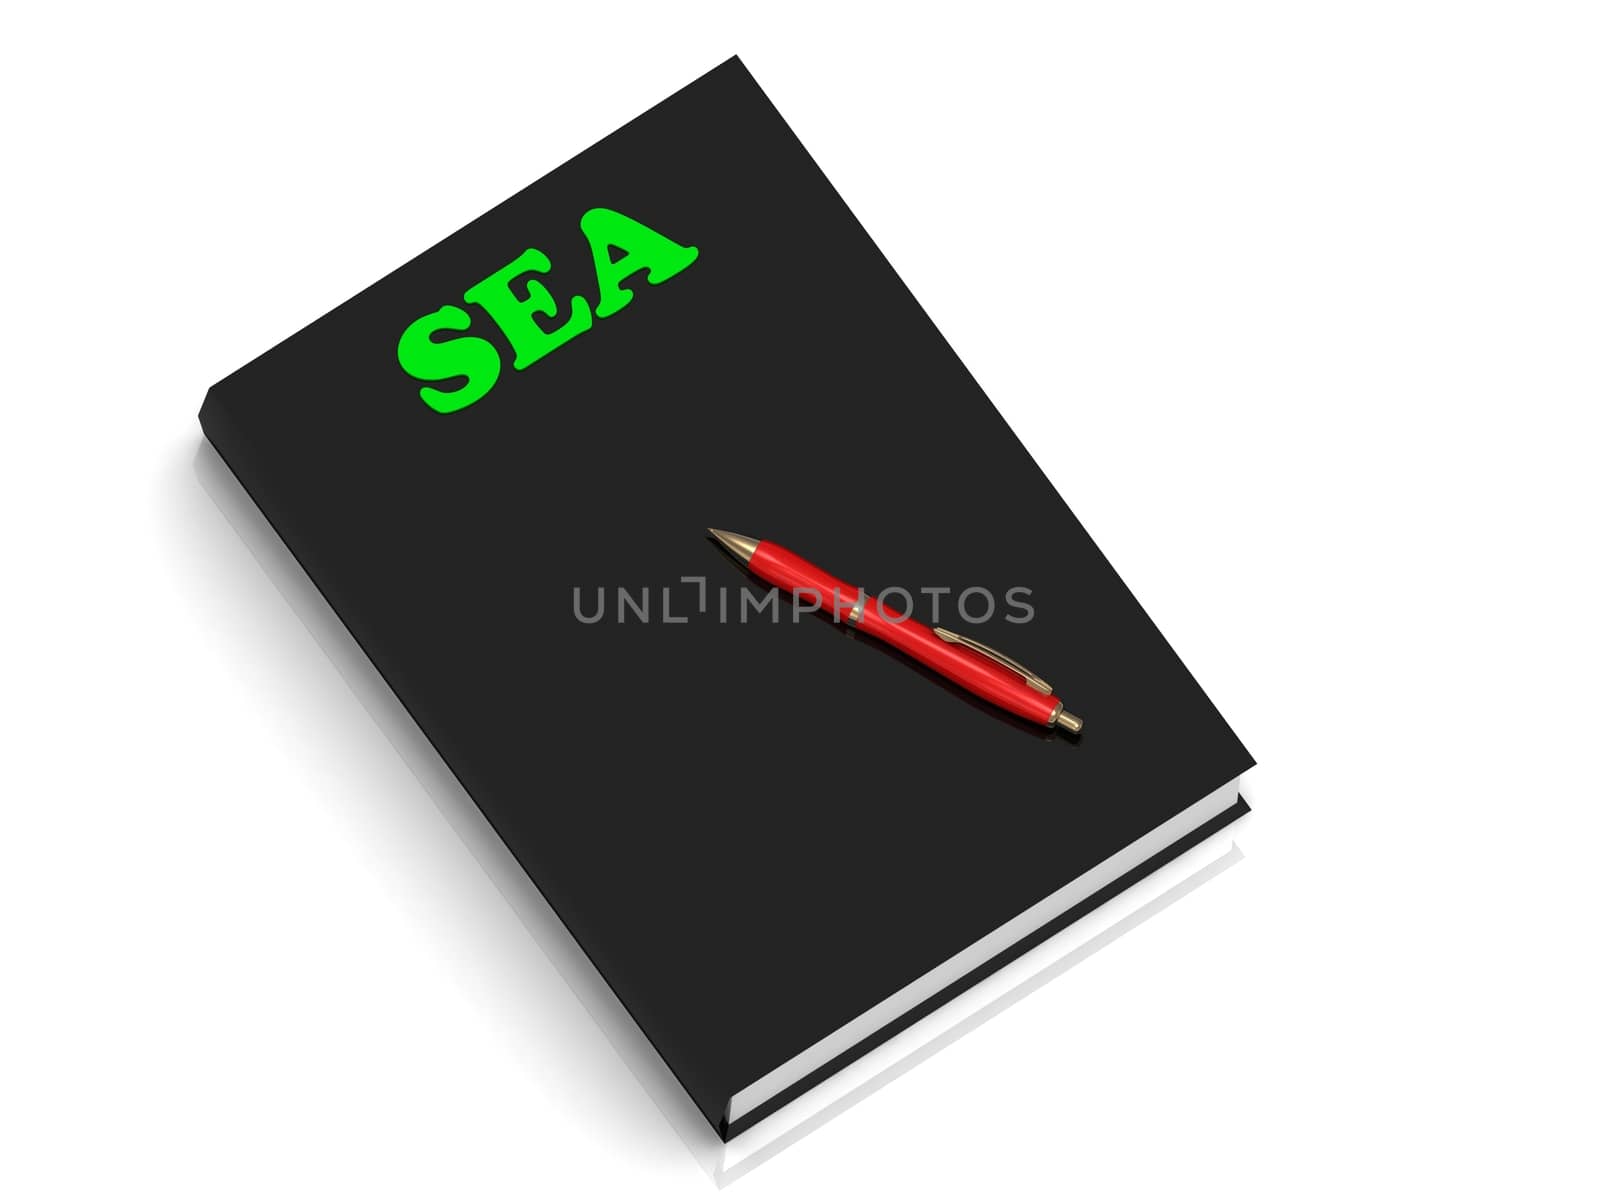 SEA- inscription of green letters on black book on white background